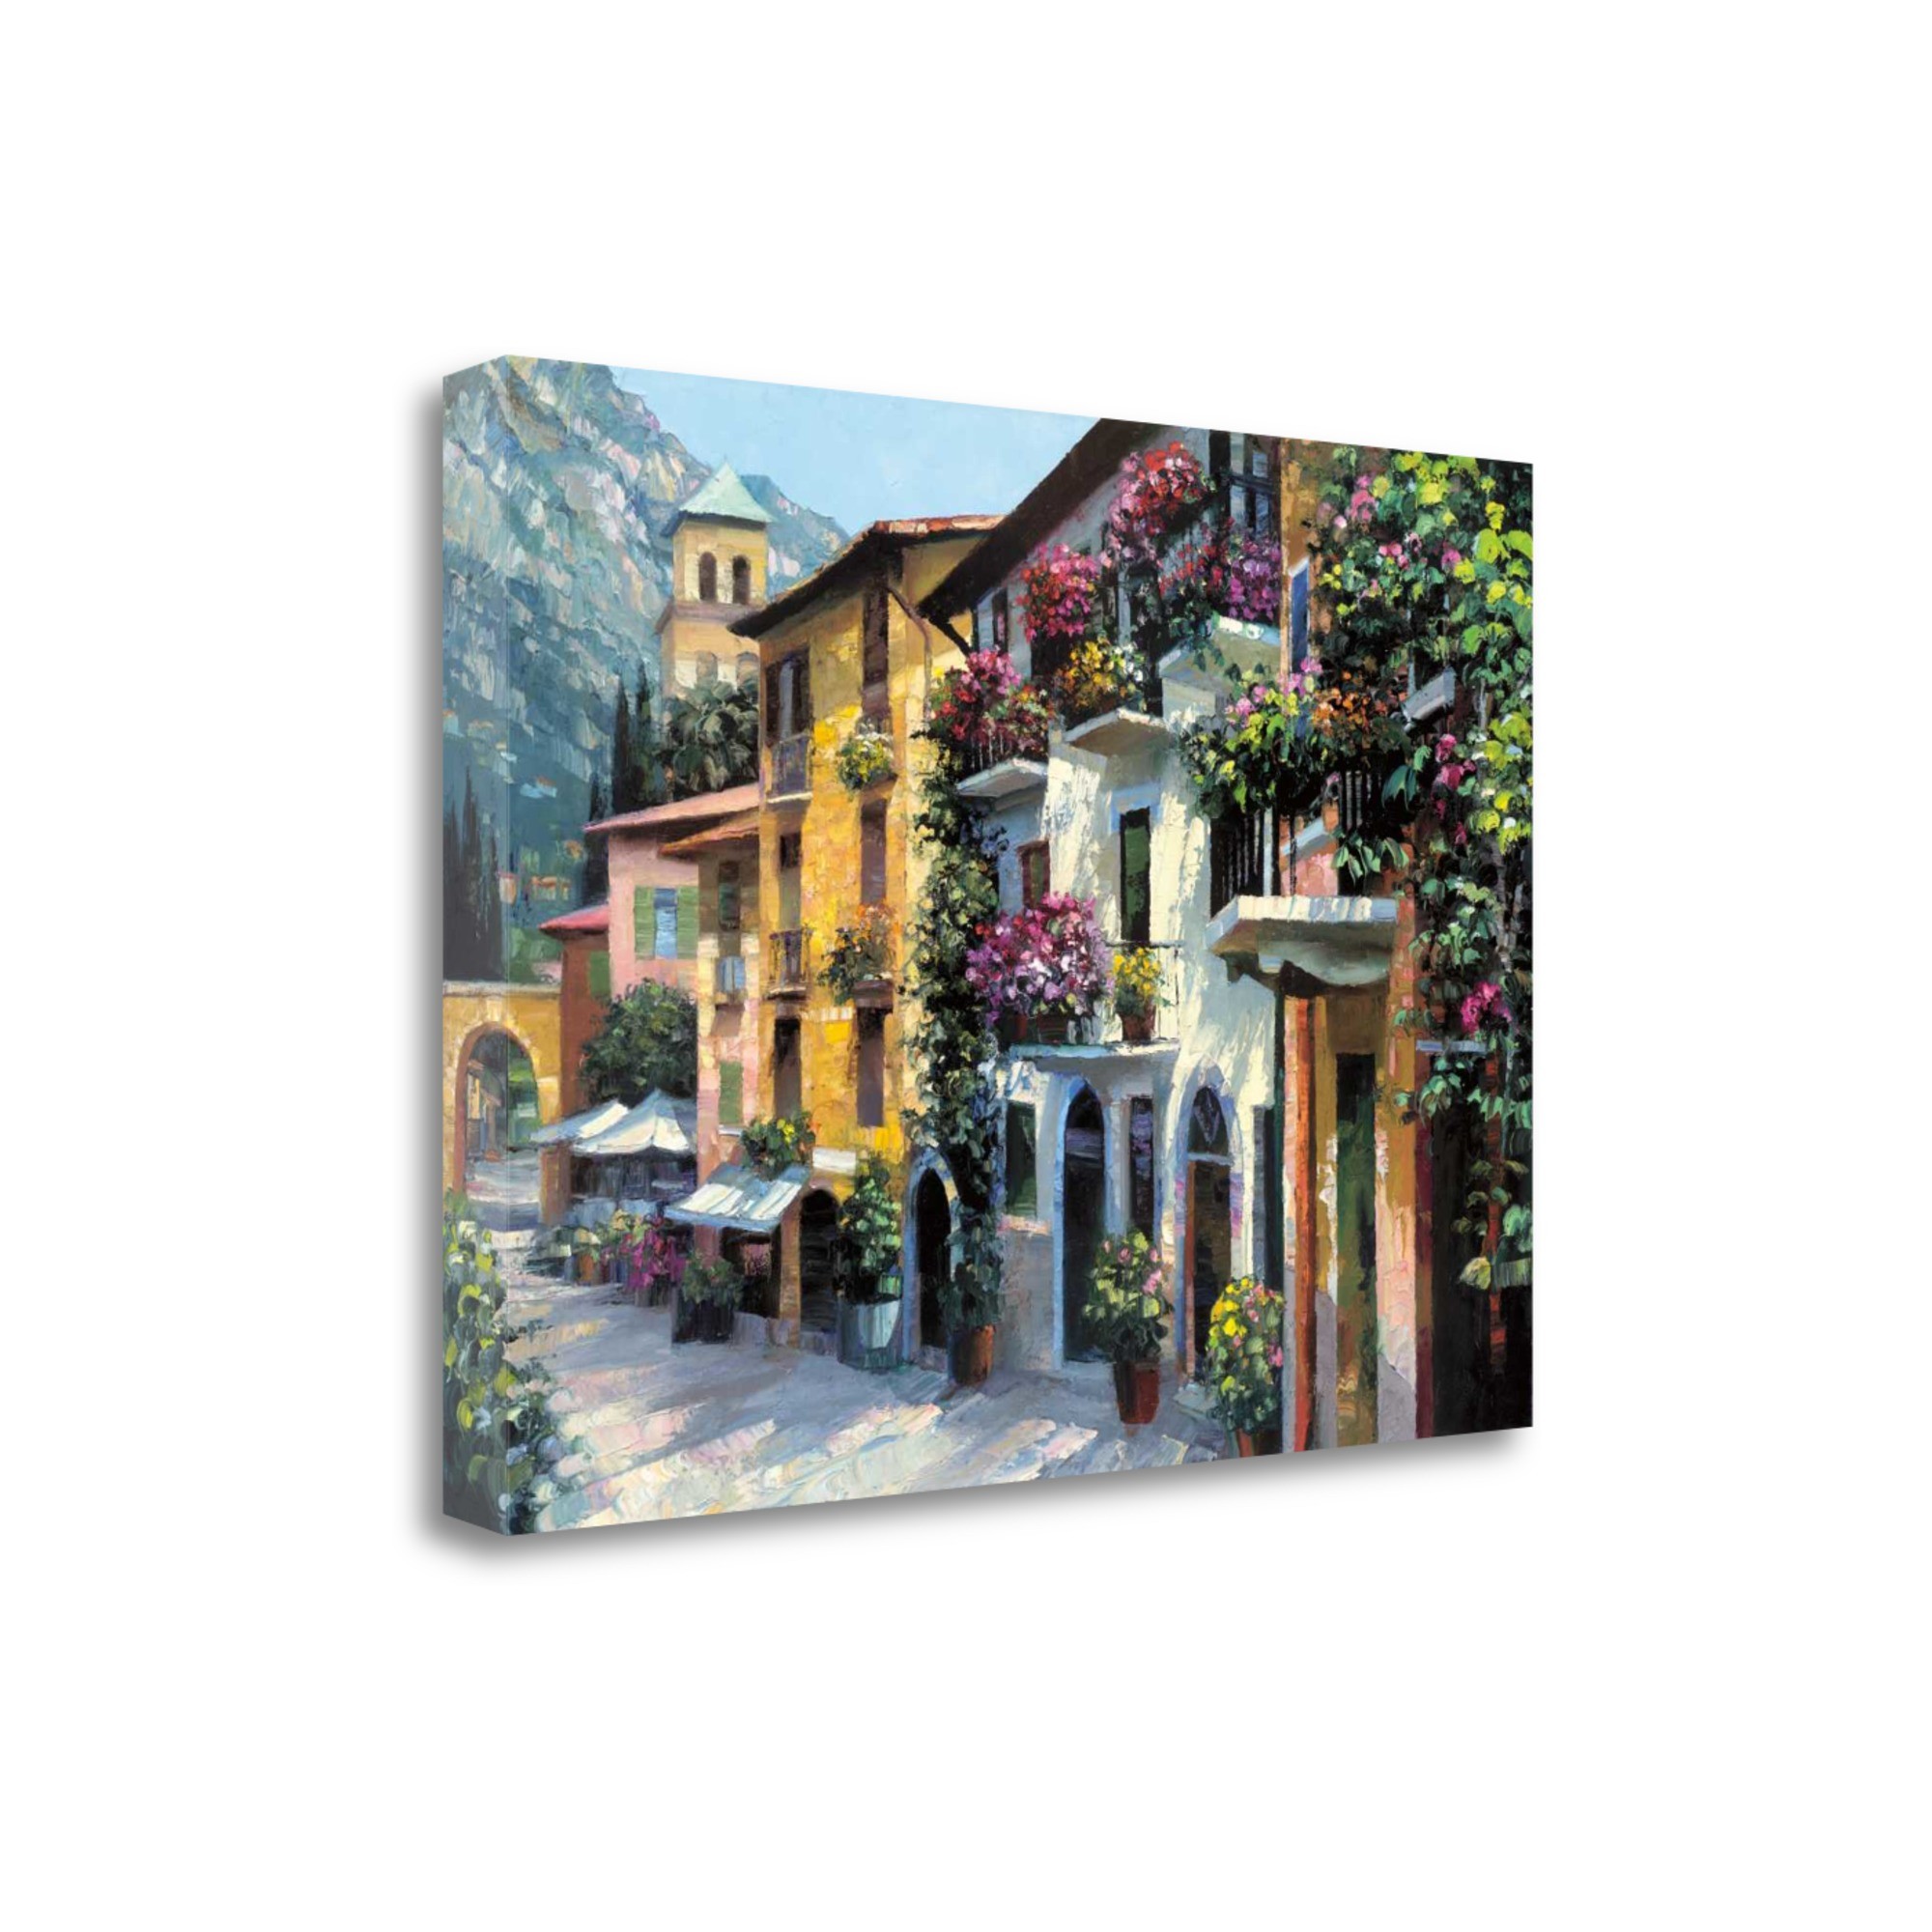 47" Village Pathway and Colorful Buildings Giclee Wrap Canvas Wall Art